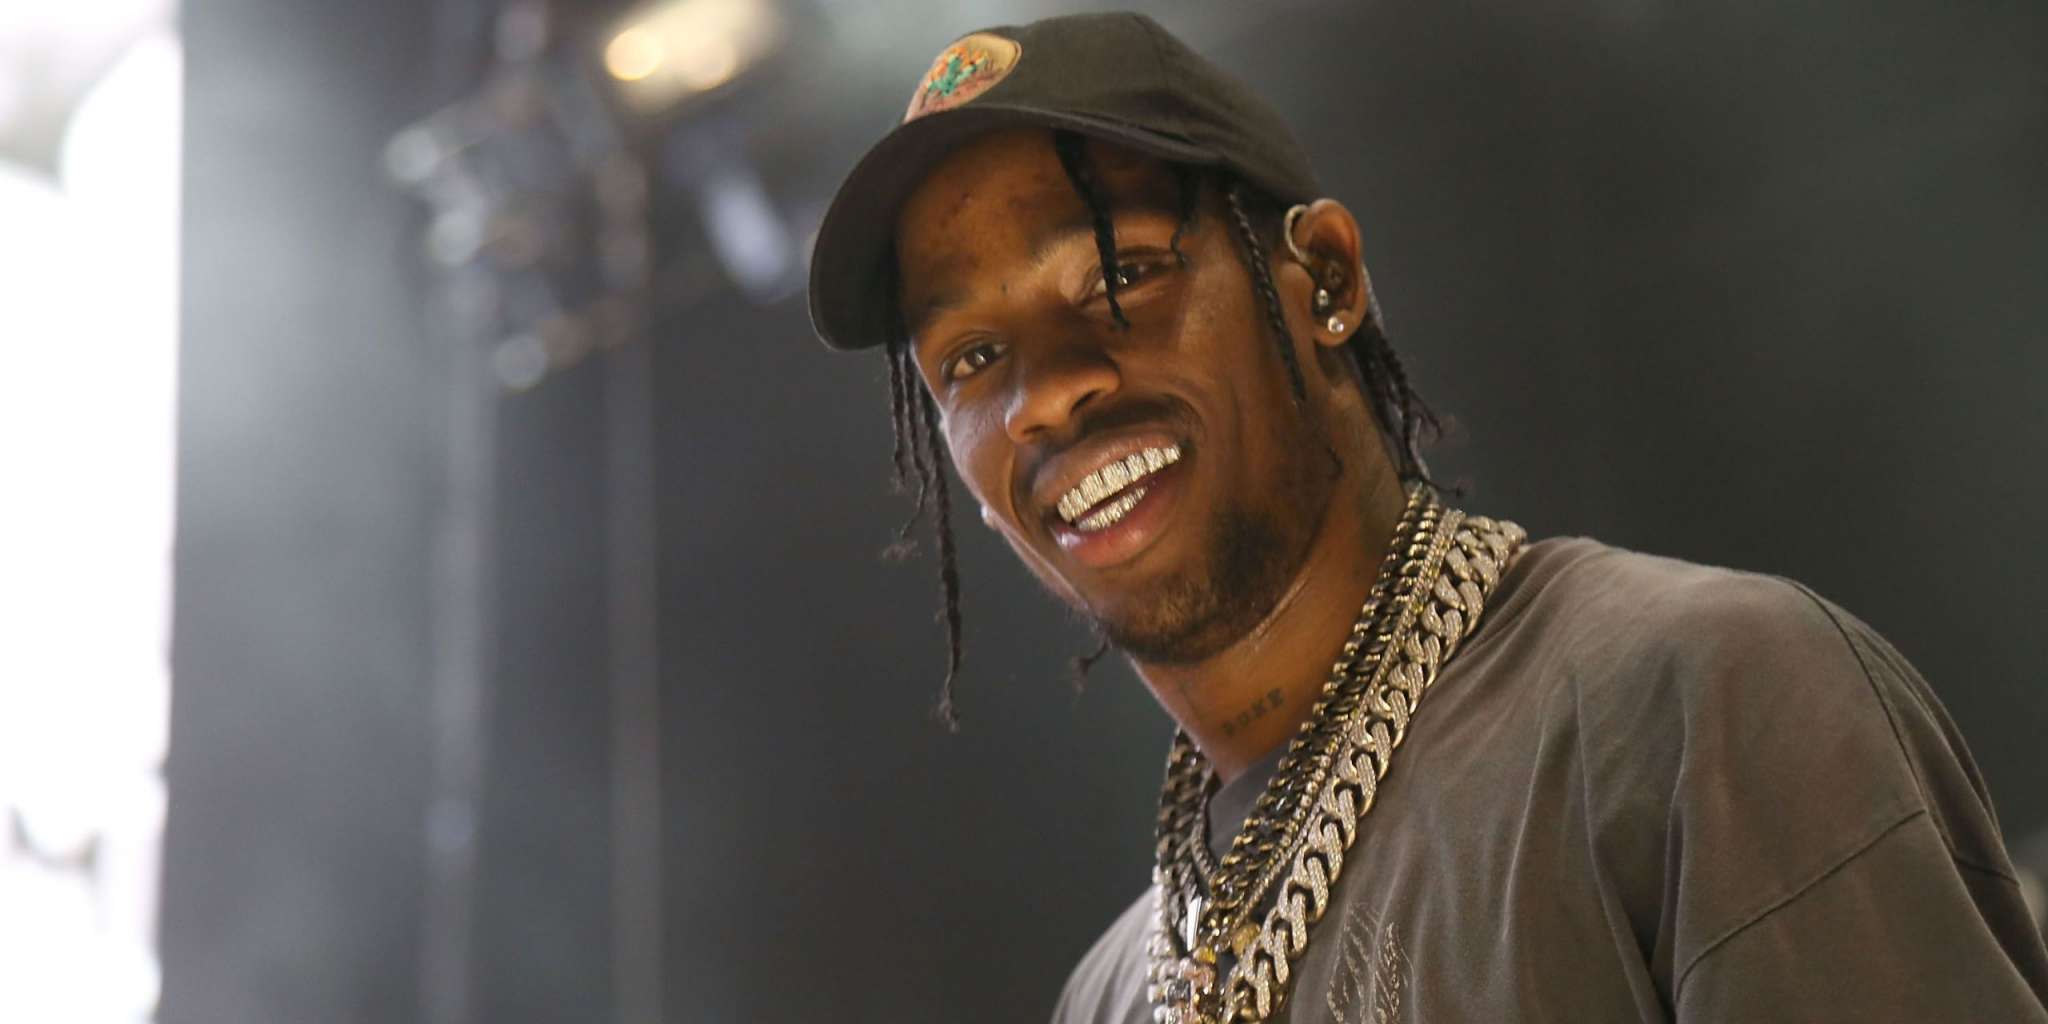 Travis Scott Agrees To Perform At The Super Bowl Halftime Show - Check Out His Condition